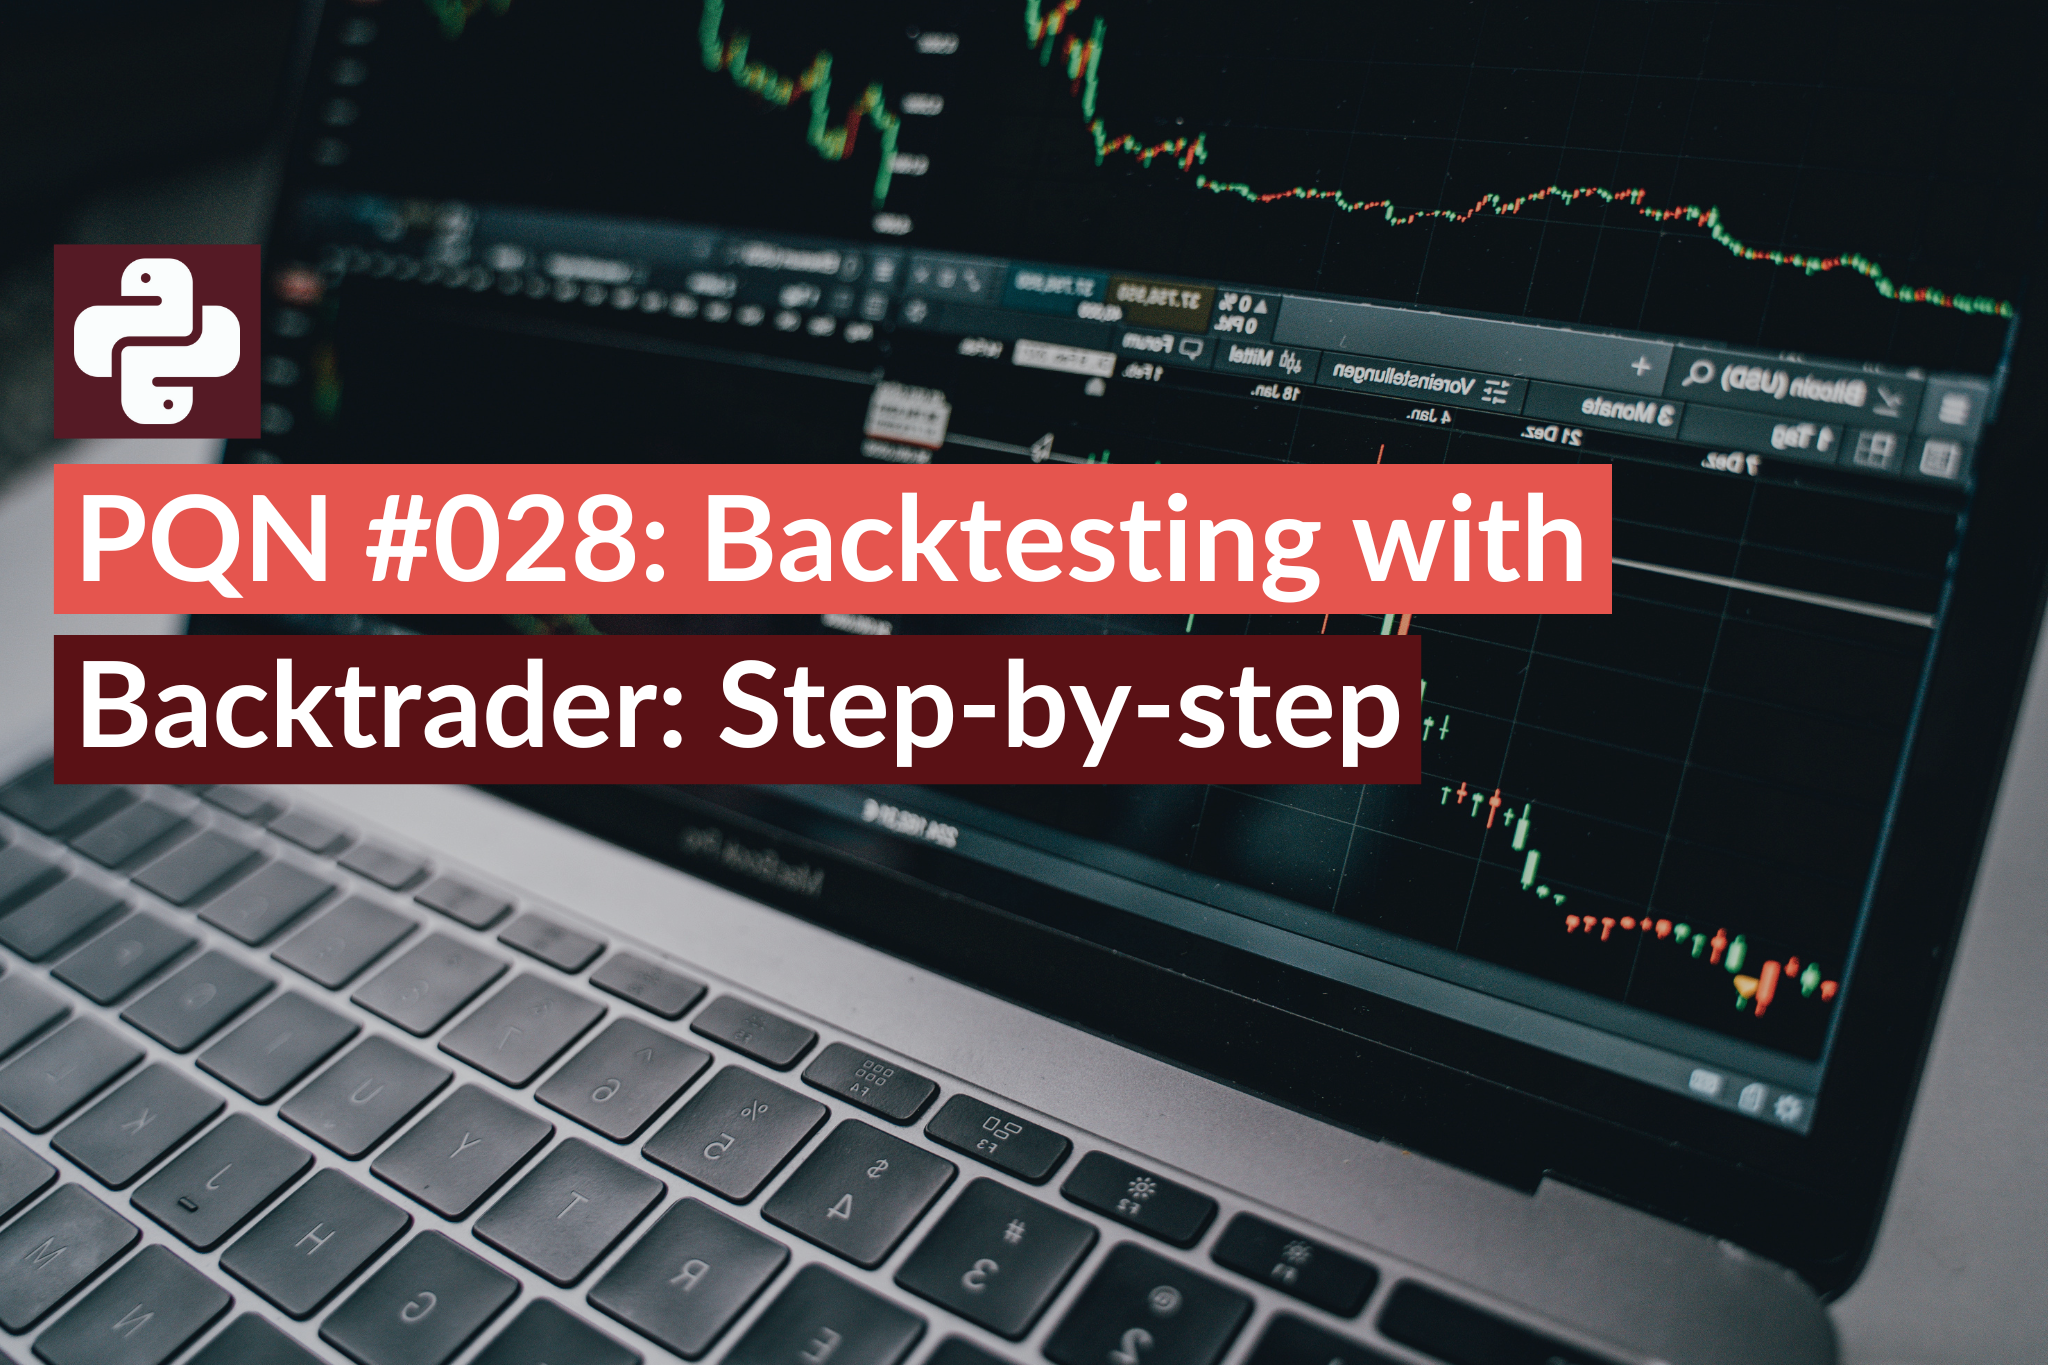 PQN #028: Backtesting with Backtrader: Step-by-step